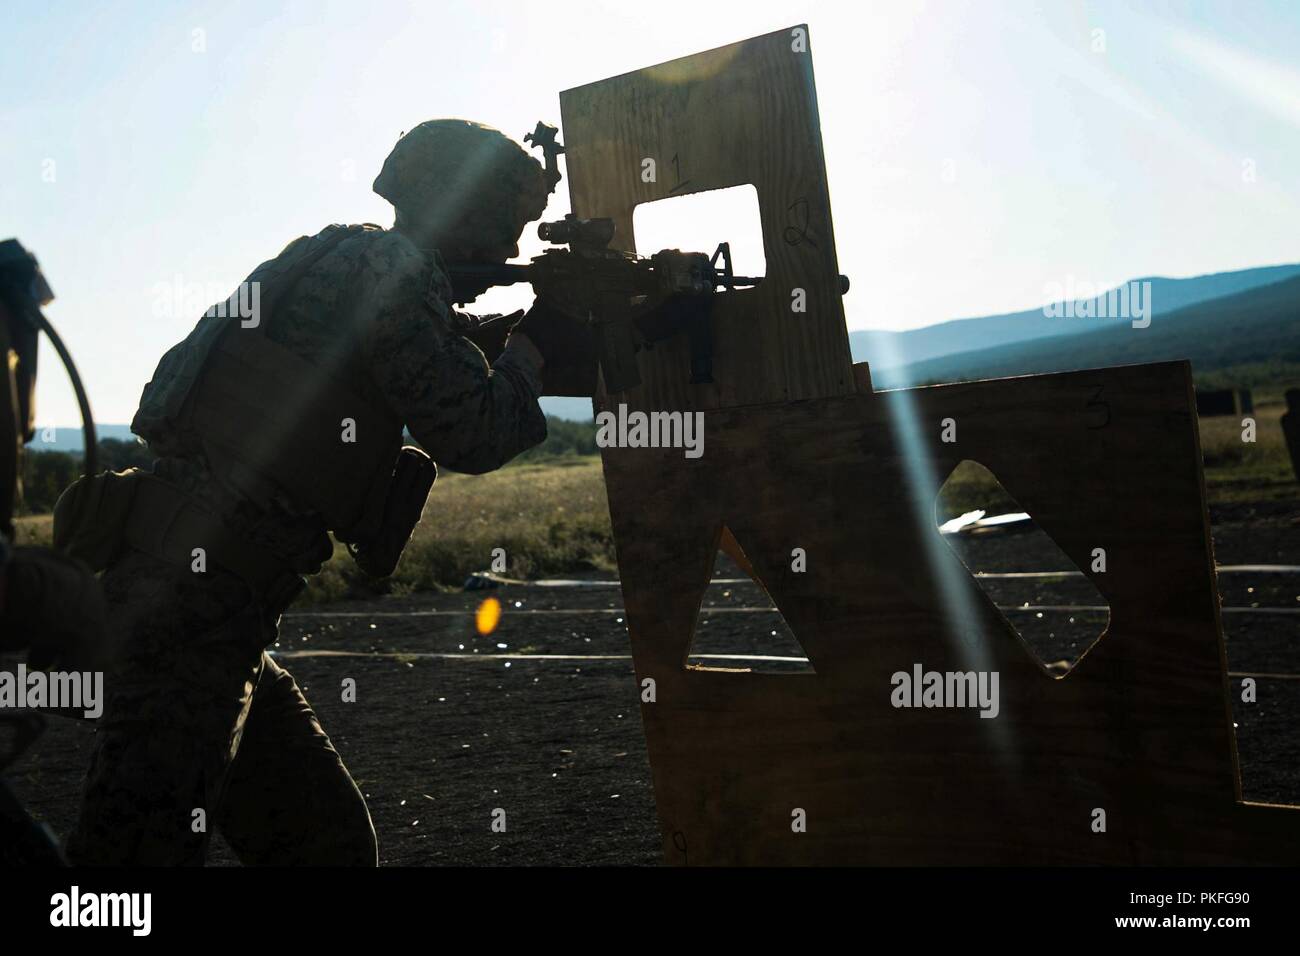 A U.S. Marine with Black Sea Rotational Force 18.1 execute an advanced portion of a Combat Marksmanship Program range during Exercise Platinum Lion 18 at Novo Selo Training Area, Bulgaria, Aug. 5, 2018. Platinum Lion is an annual field training exercise that reinforces relationships in a joint training environment, builds understanding of partner nation tactics, techniques and procedures, and increases interoperability with Allied and partner forces. Stock Photo